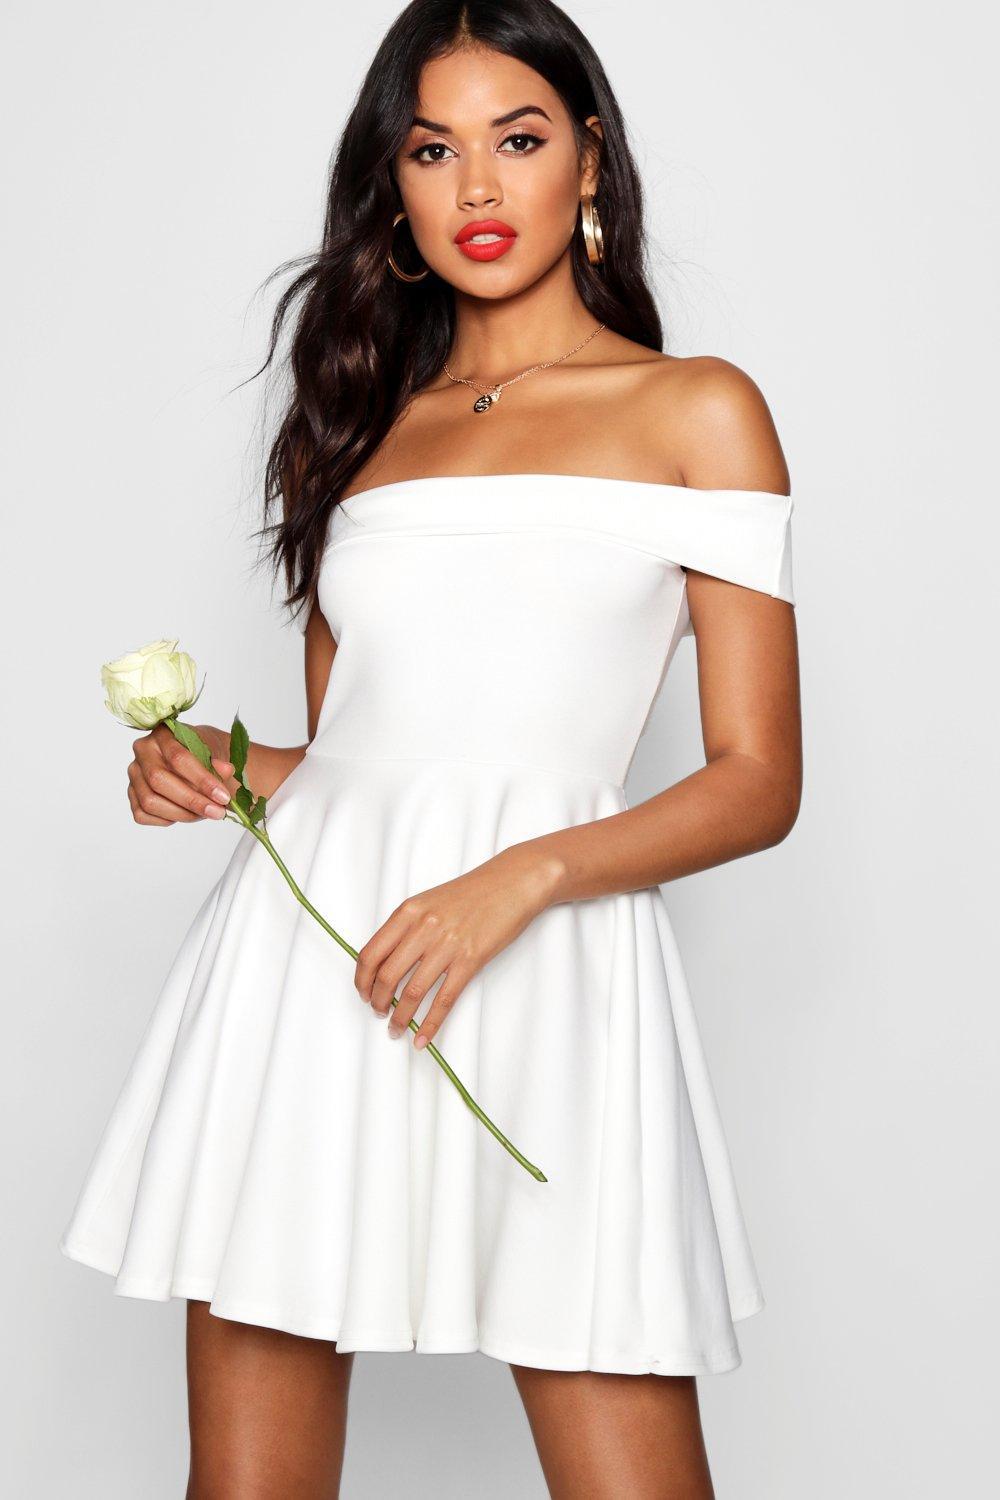 Lyst - Boohoo Off The Shoulder Skater Dress in White